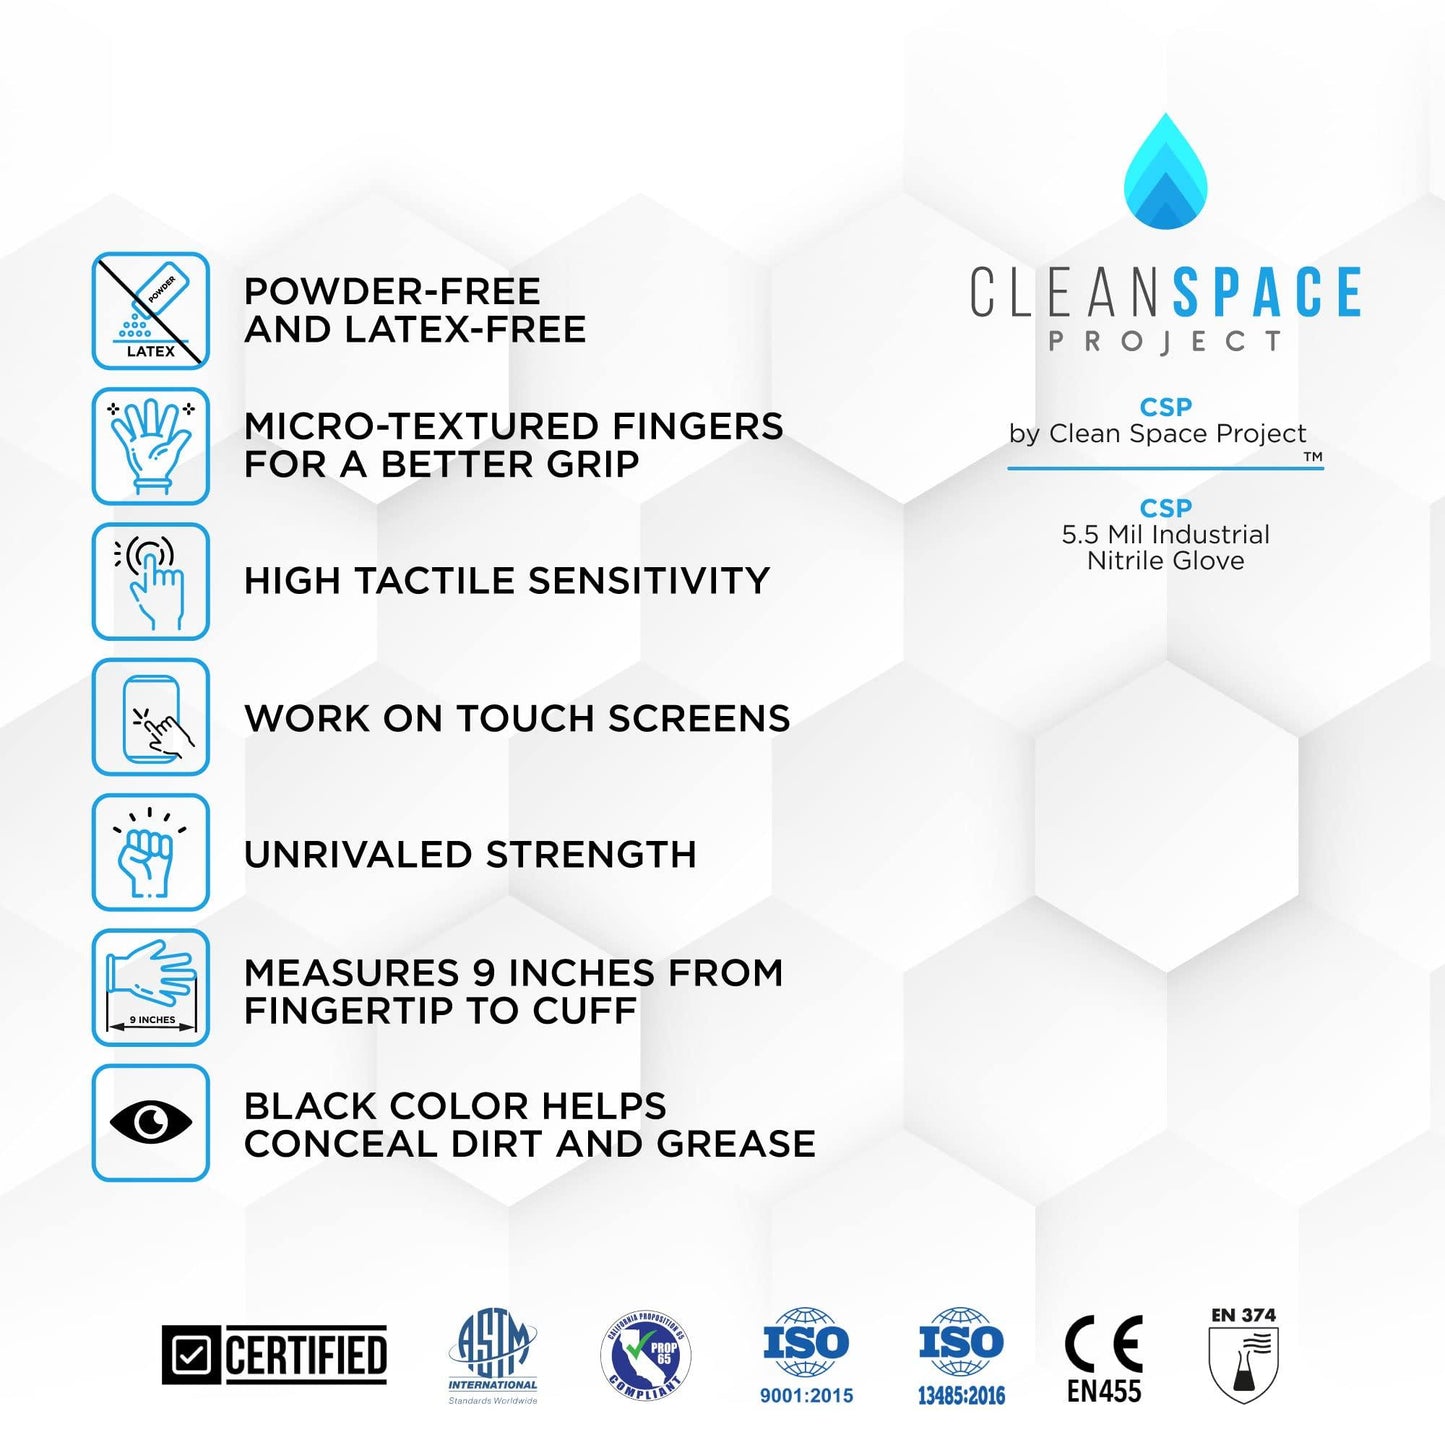 CLEAN SPACE PROJECT Nitrile Gloves, Extra Thick 5.5 Mil, Disposable, Powder Free, Latex Free (Black - Large, Box of 100) - CookCave